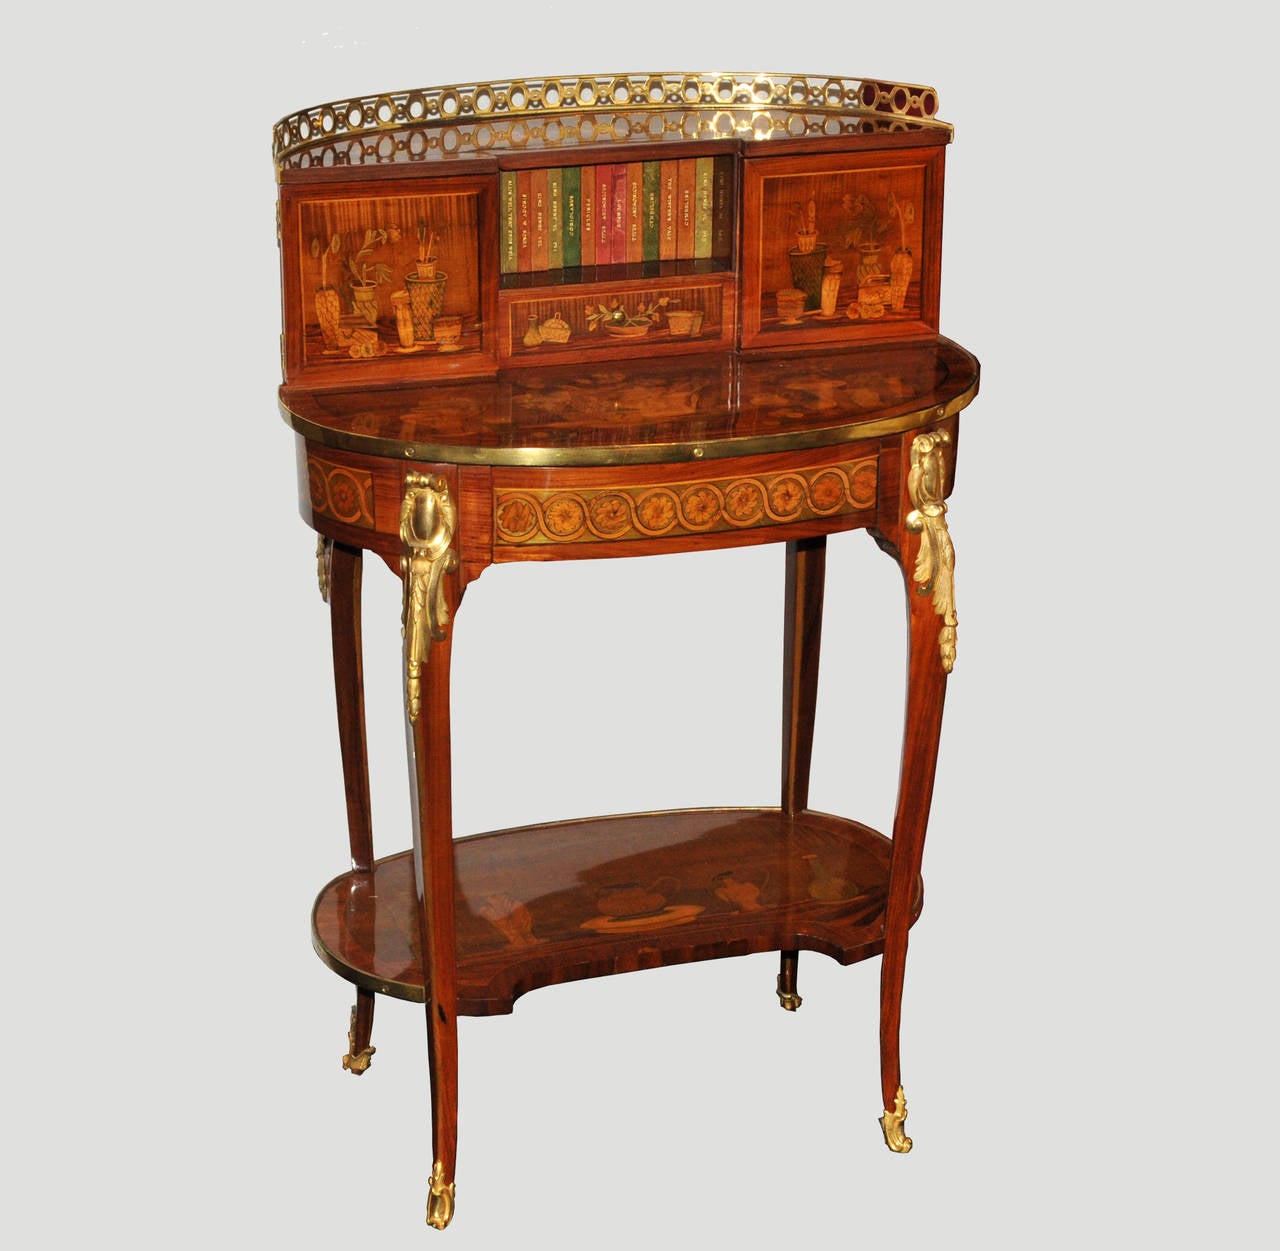 Bonheur-du-jour (women writing desk) inlaid with tulipwood, sycamore and purpleheart.

This exceptional escritoire inlaid with familiar objects opens with one main drawer discovering a writing case and two side drawers on the upper section. 
The